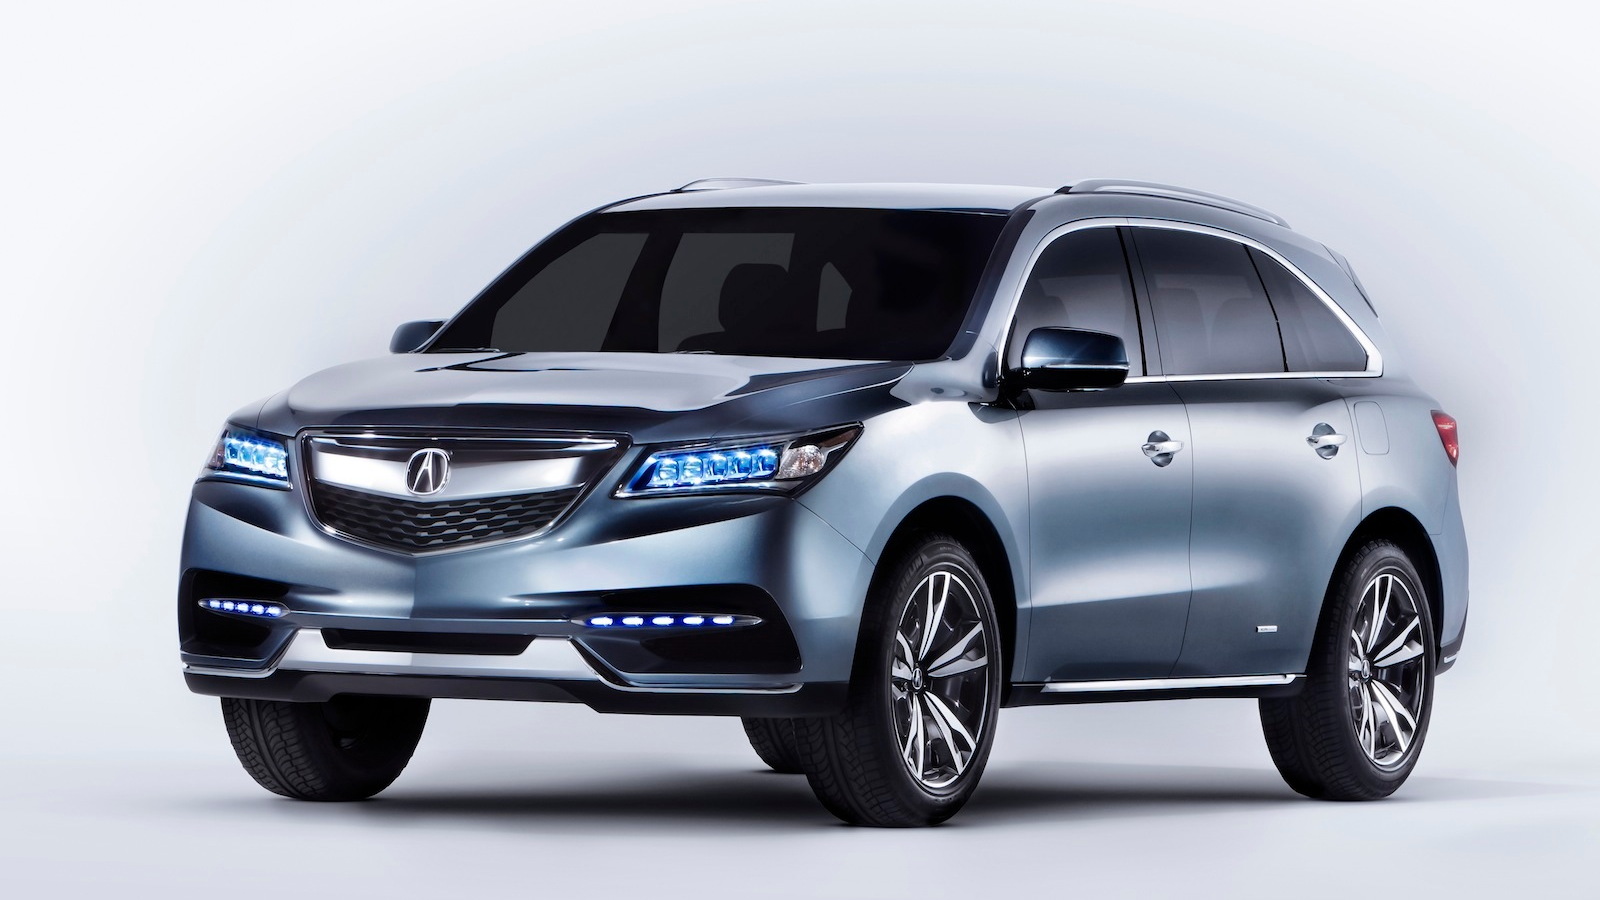 2014 Acura Mdx To Debut In Production Trim In New York